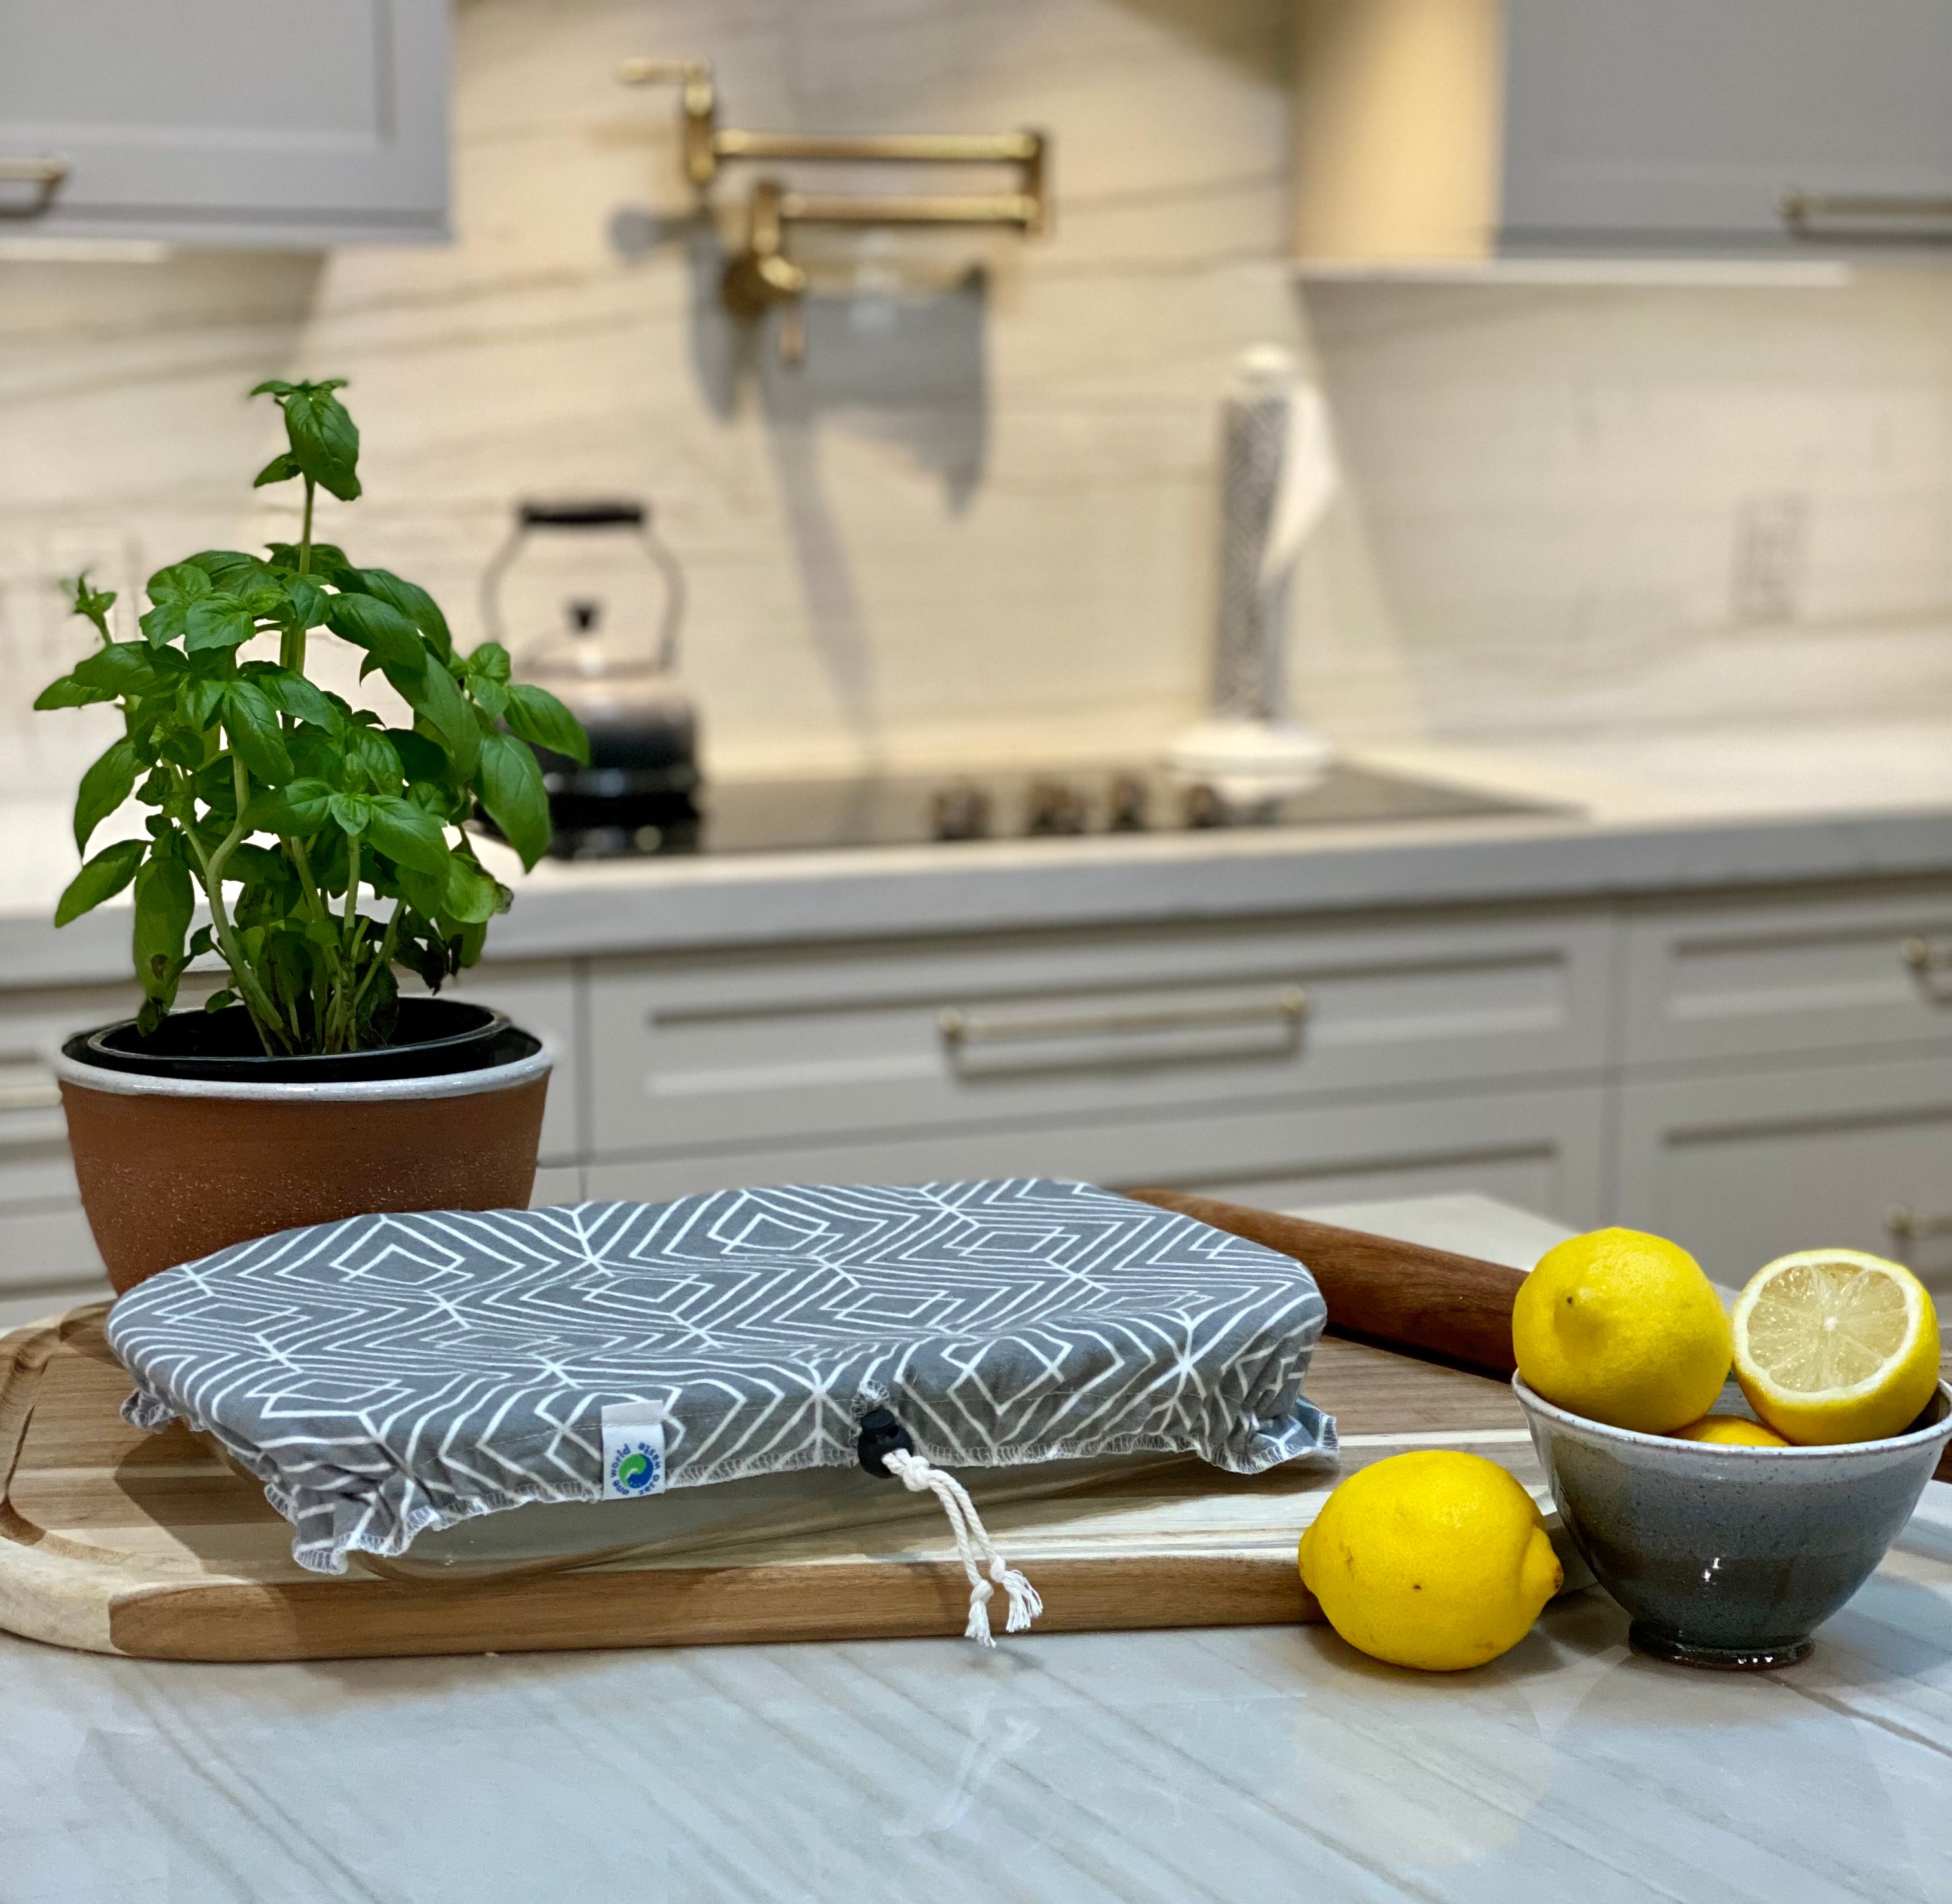 Dish Drying Mats for Kitchen Counter Waterproof for Countertop